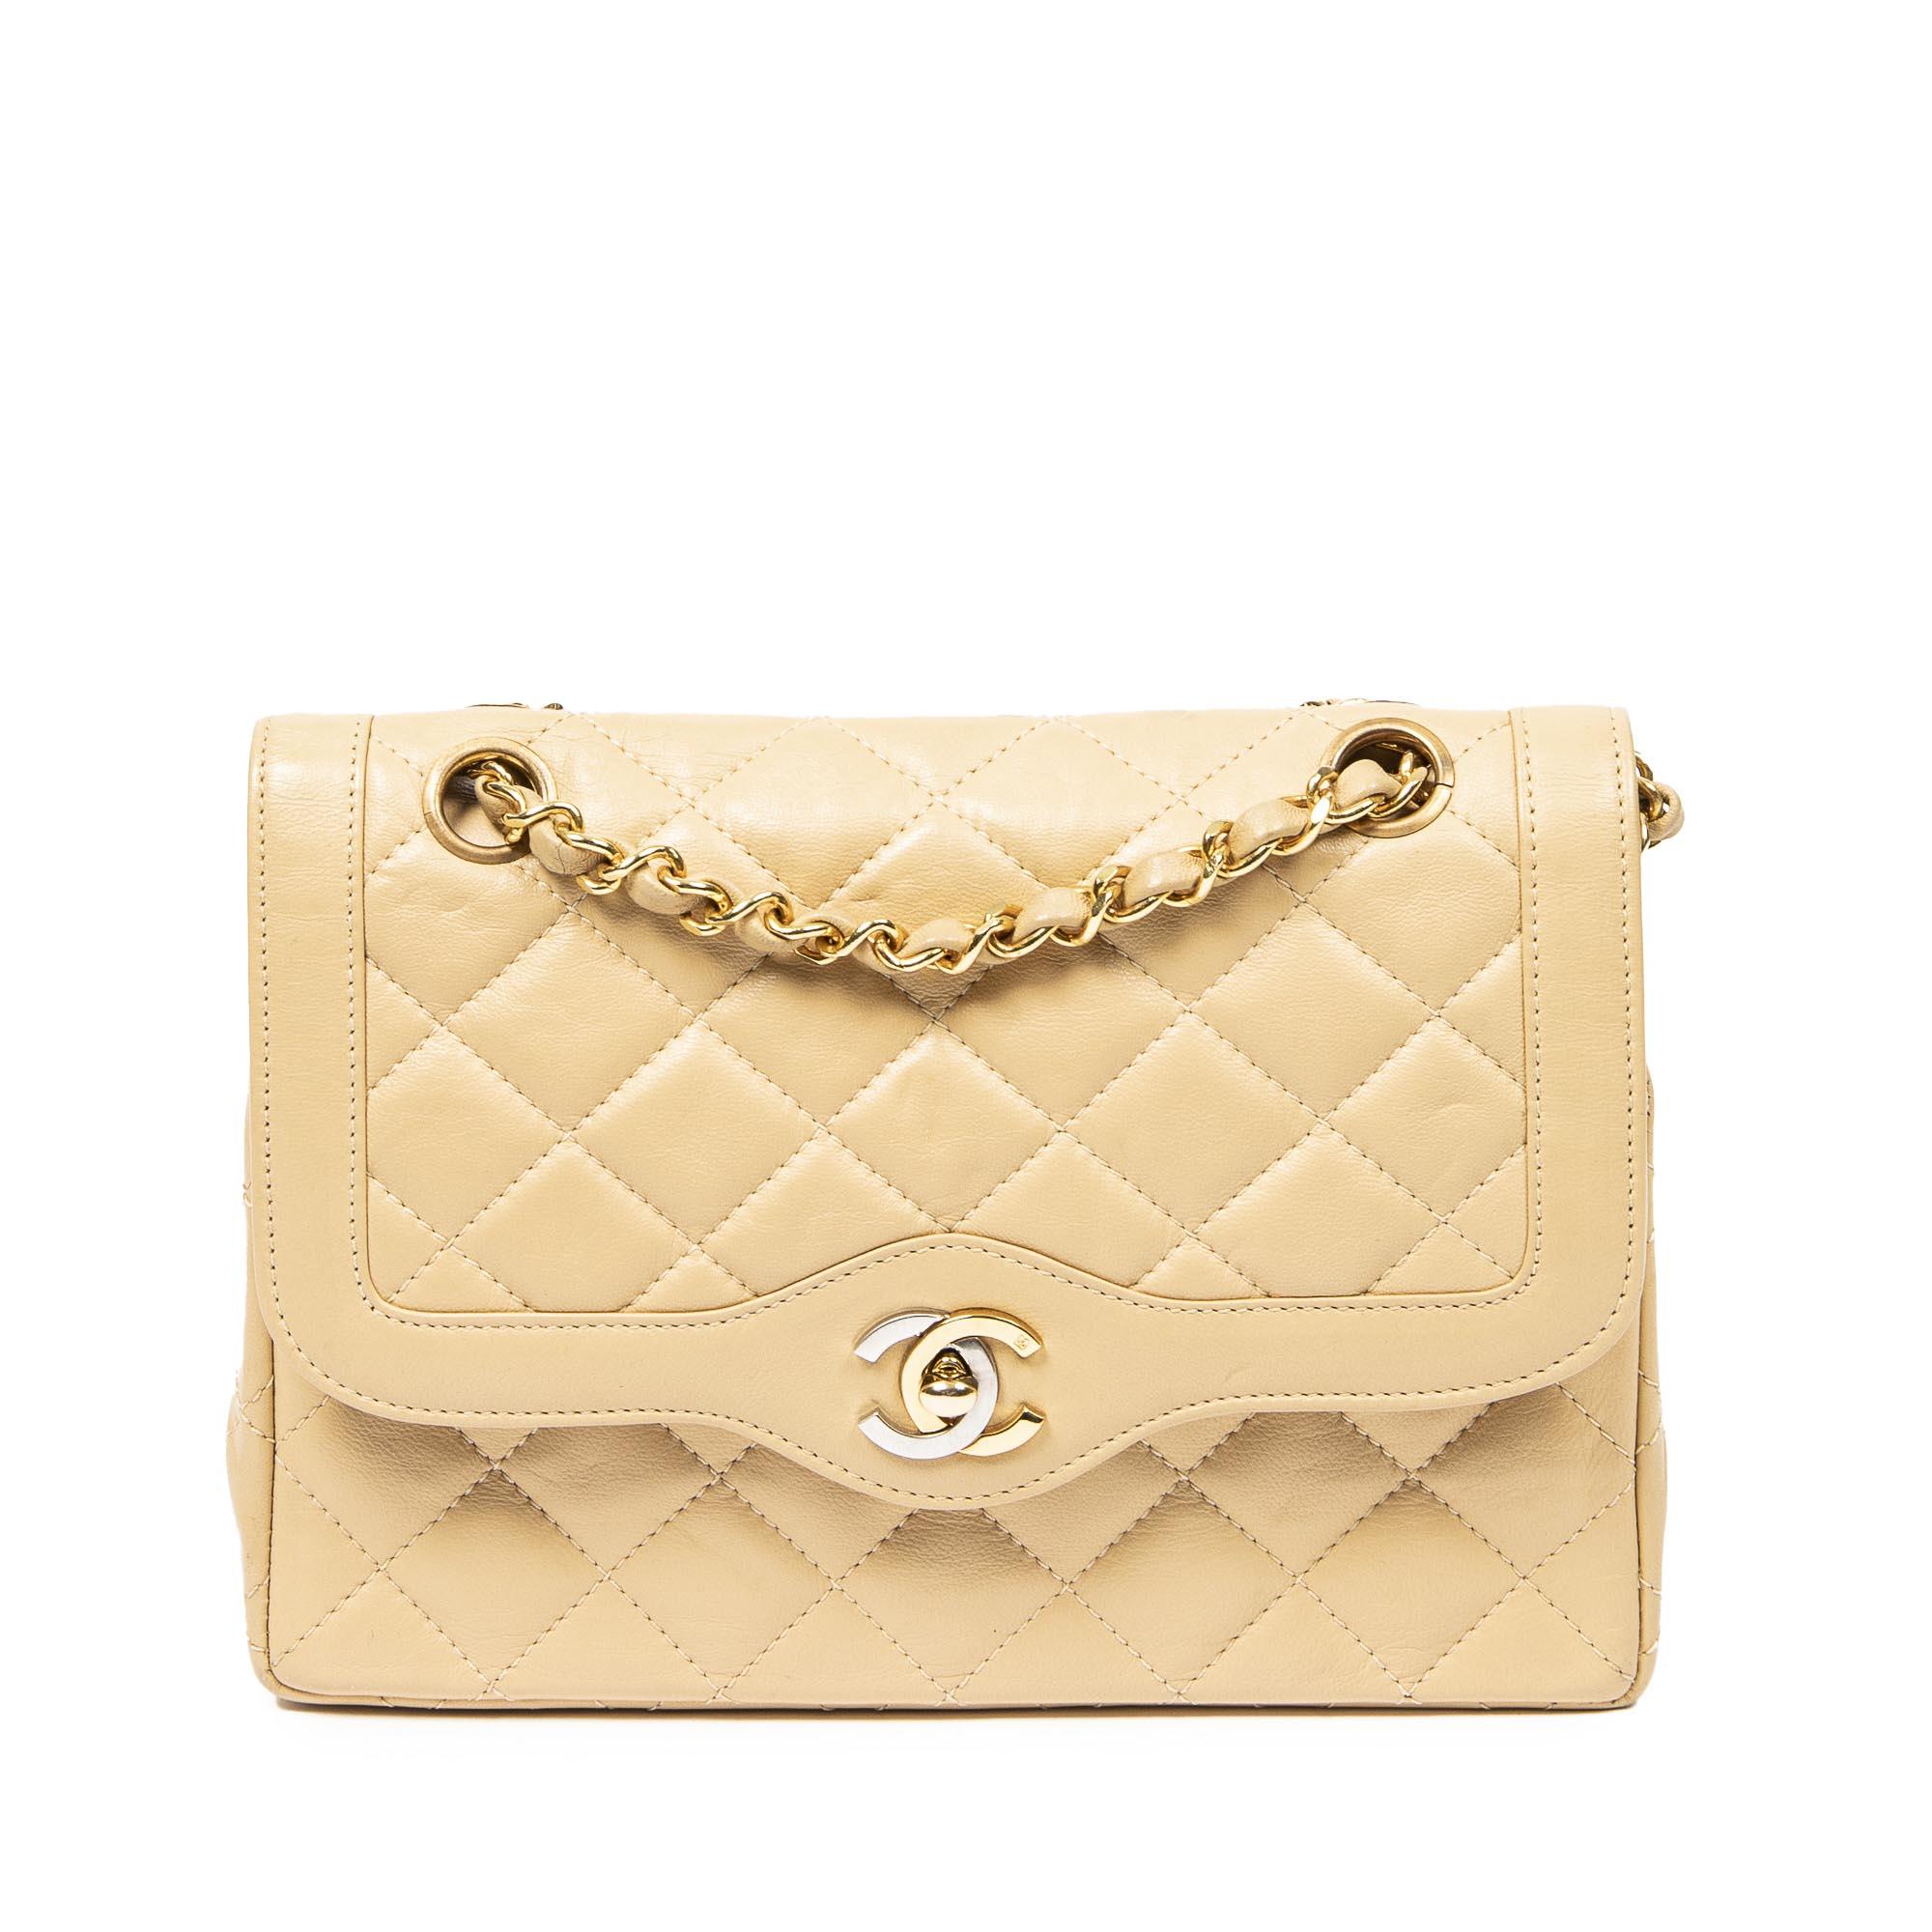 Chanel Small Paris Flap in Natural